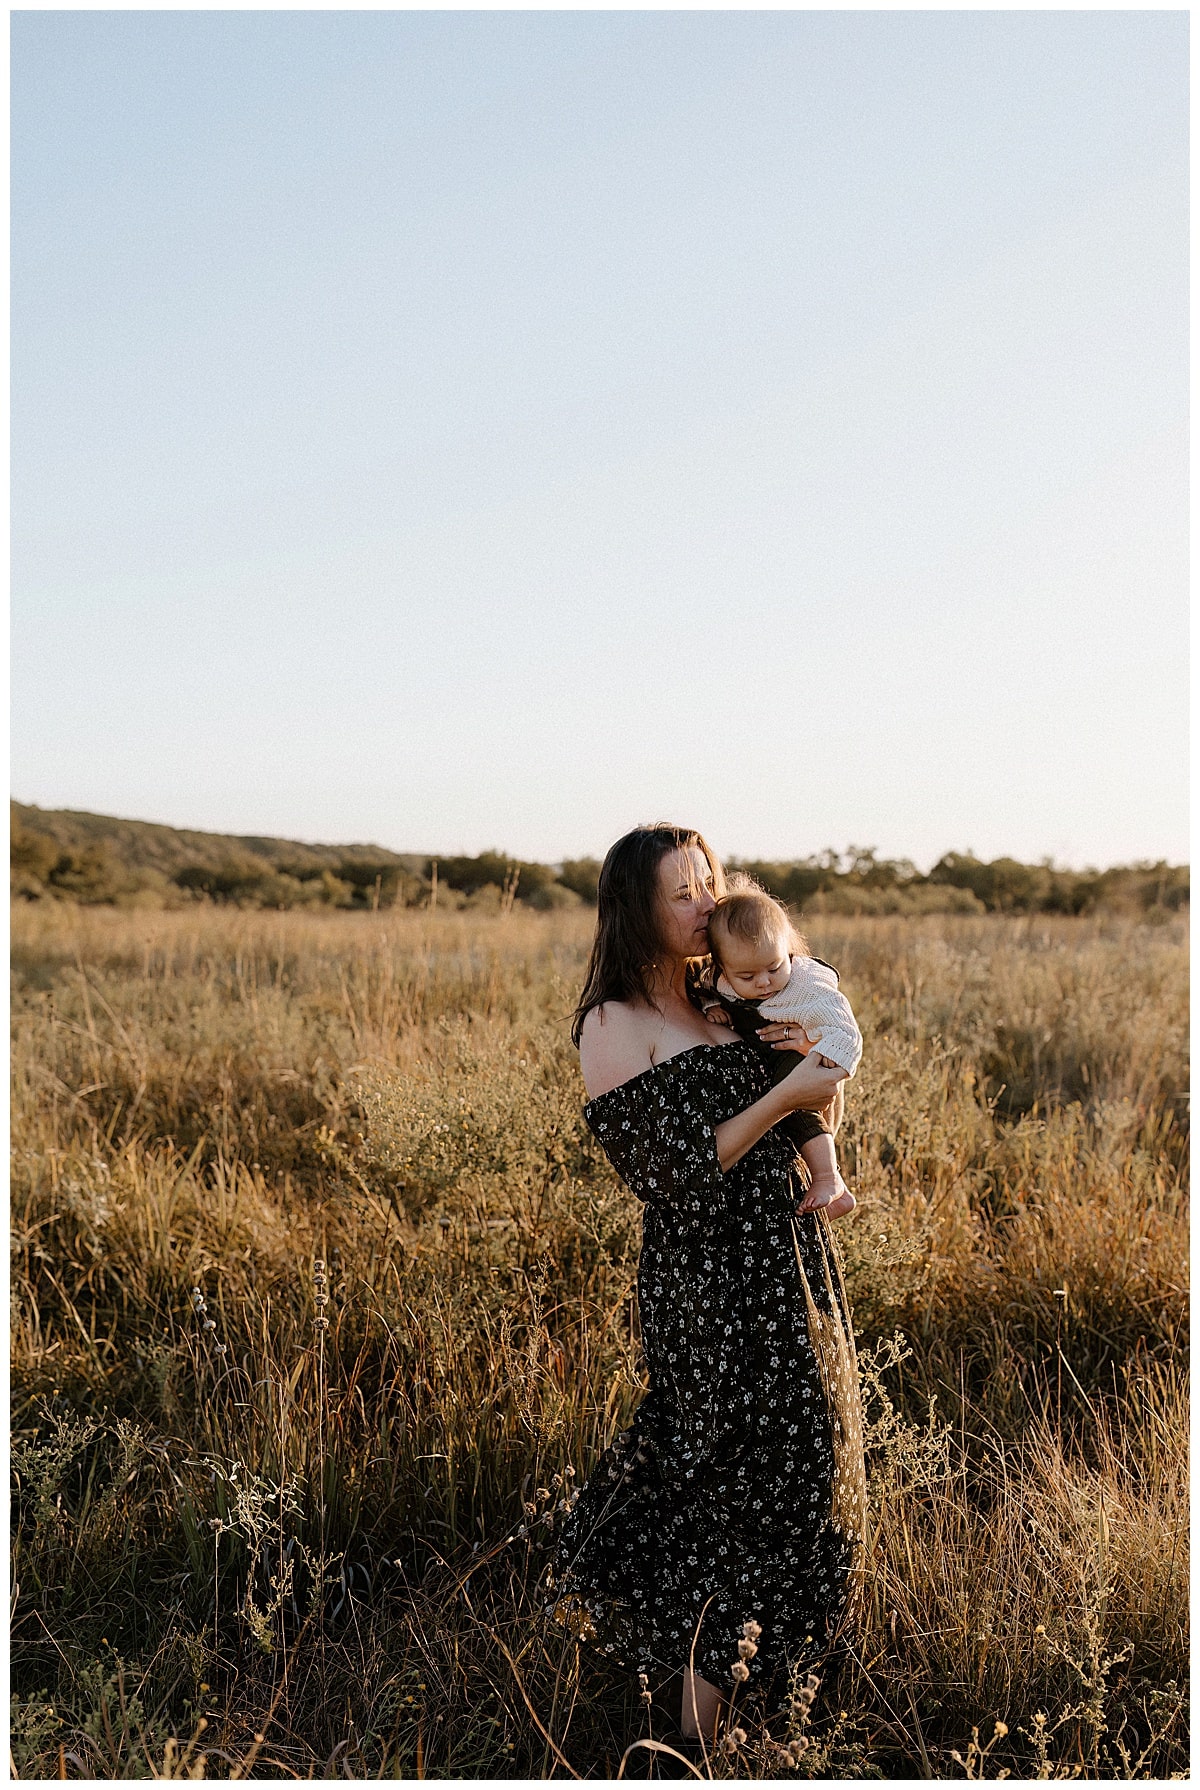 Mom holds little one close for Austin Lifestyle Photographer